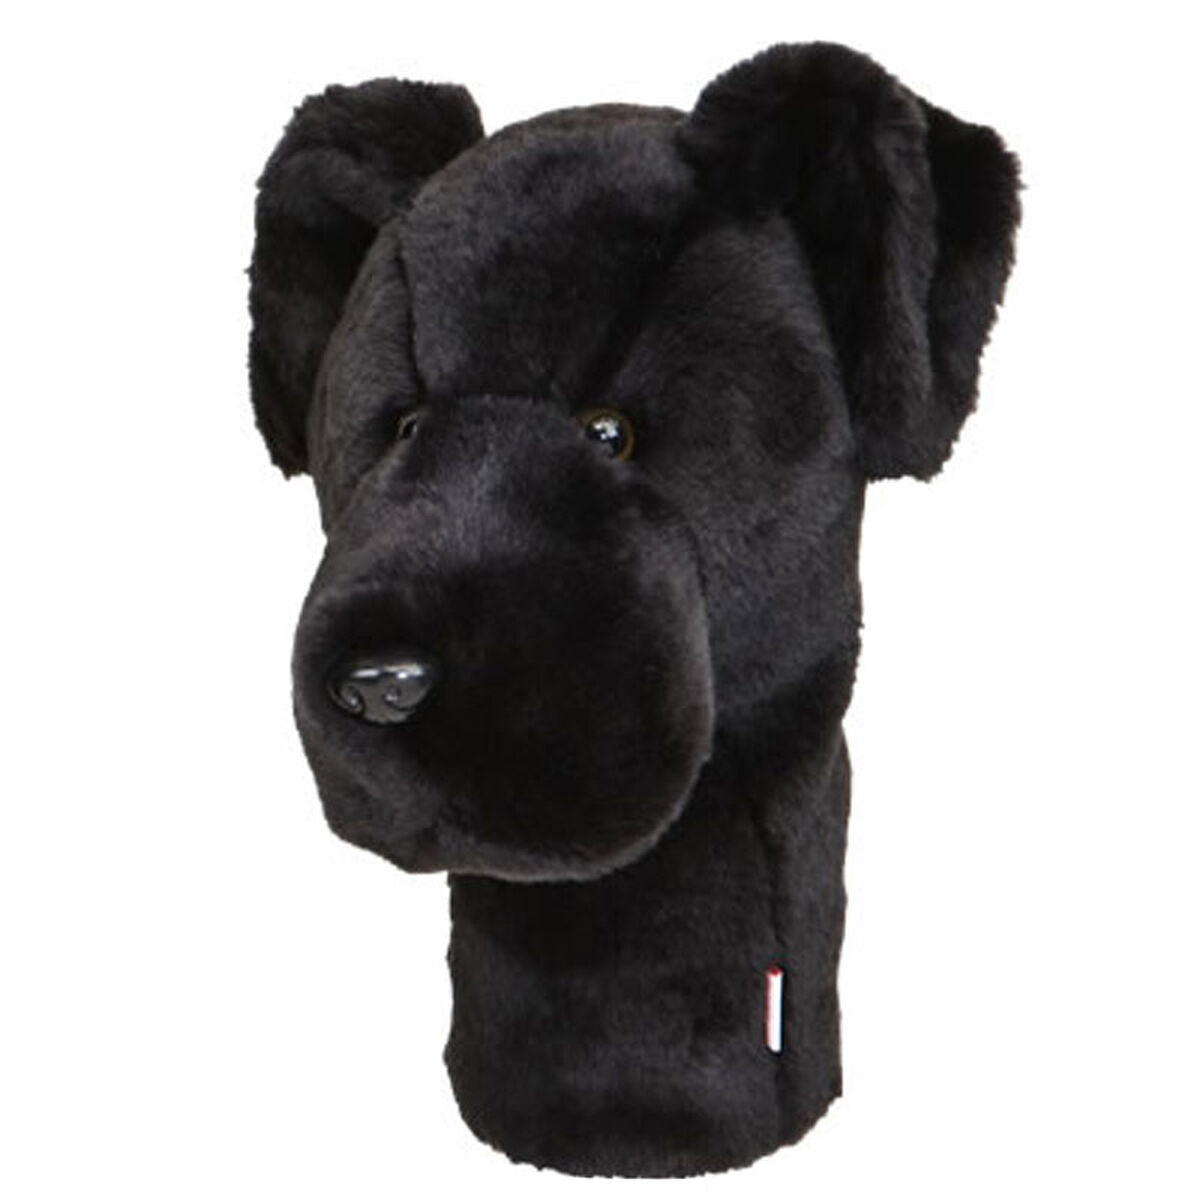 Daphne’s Headcovers Black Labrador Head Cover | American Golf, One Size